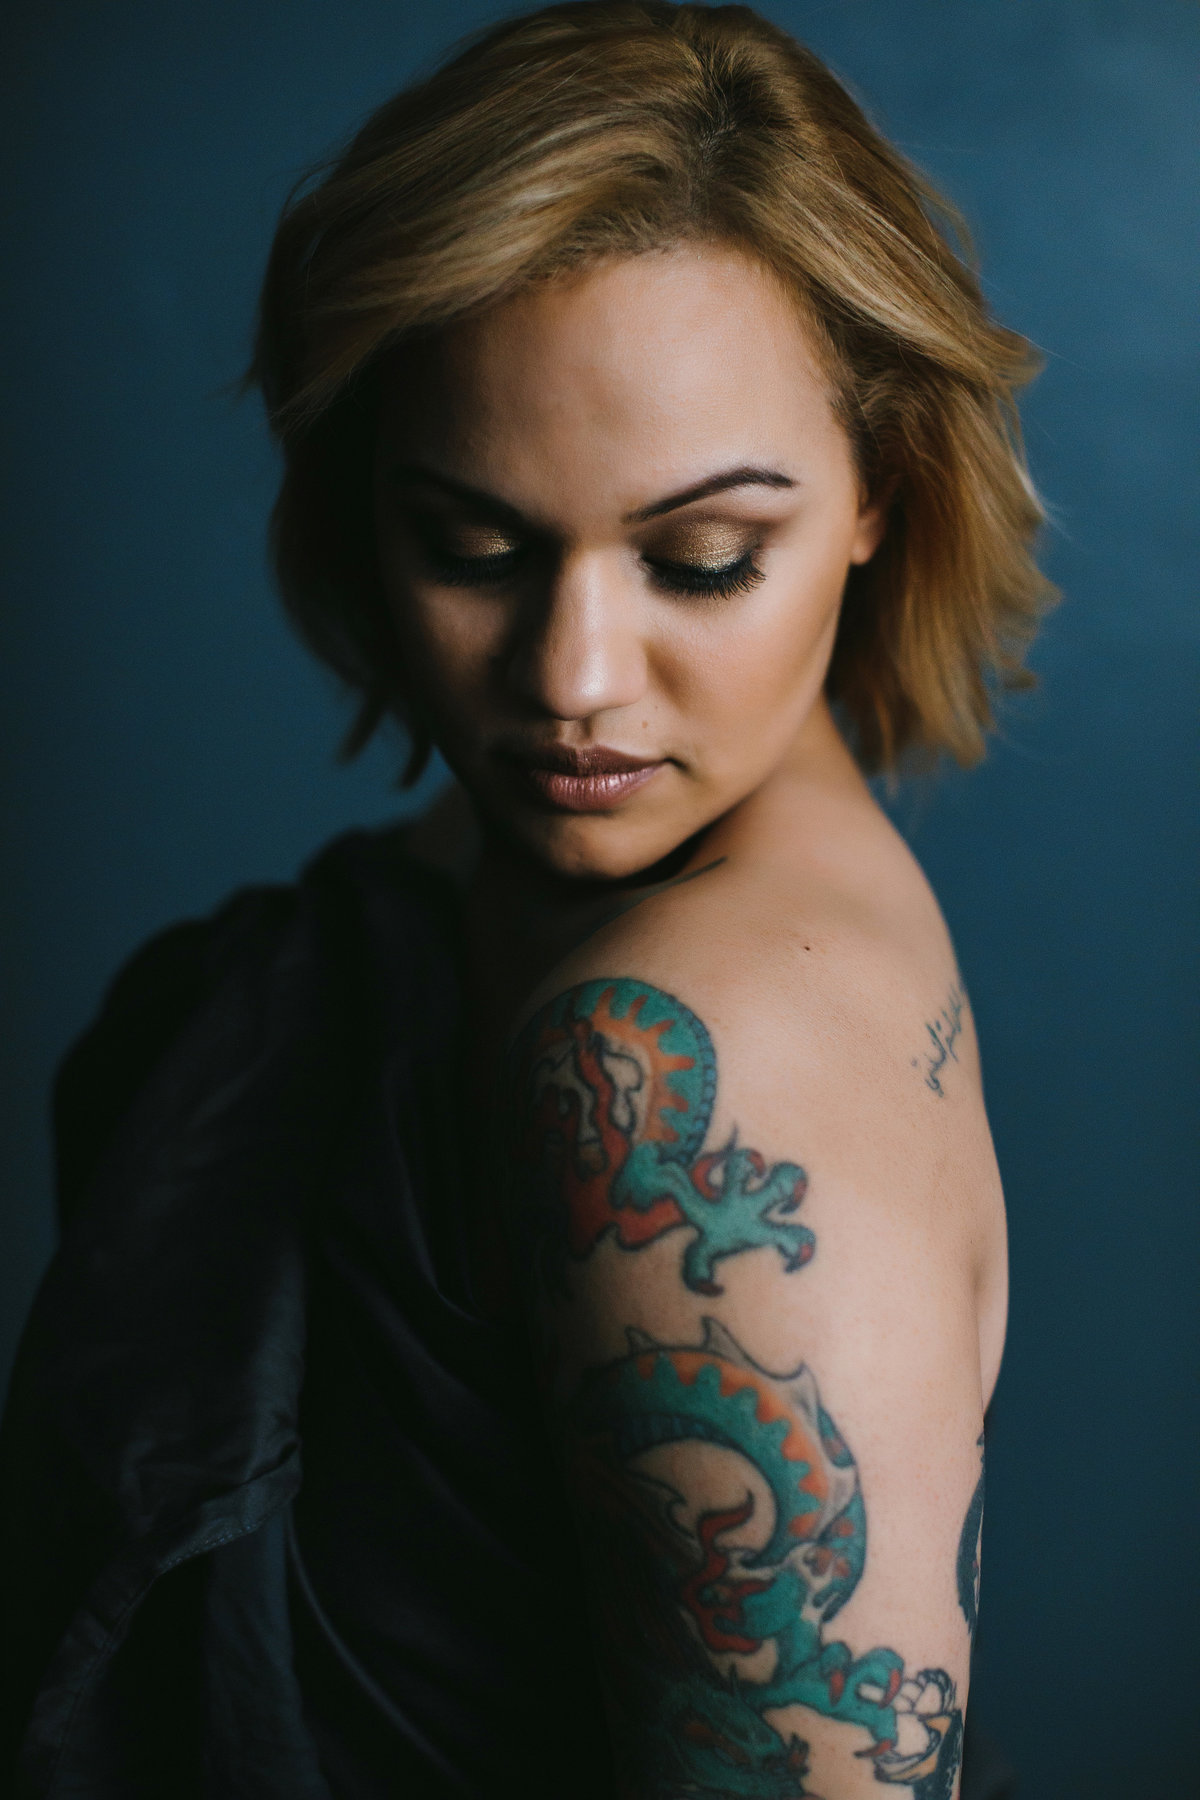 stunning boudoir portrait of woman with large tattoo posing against blue backdrop